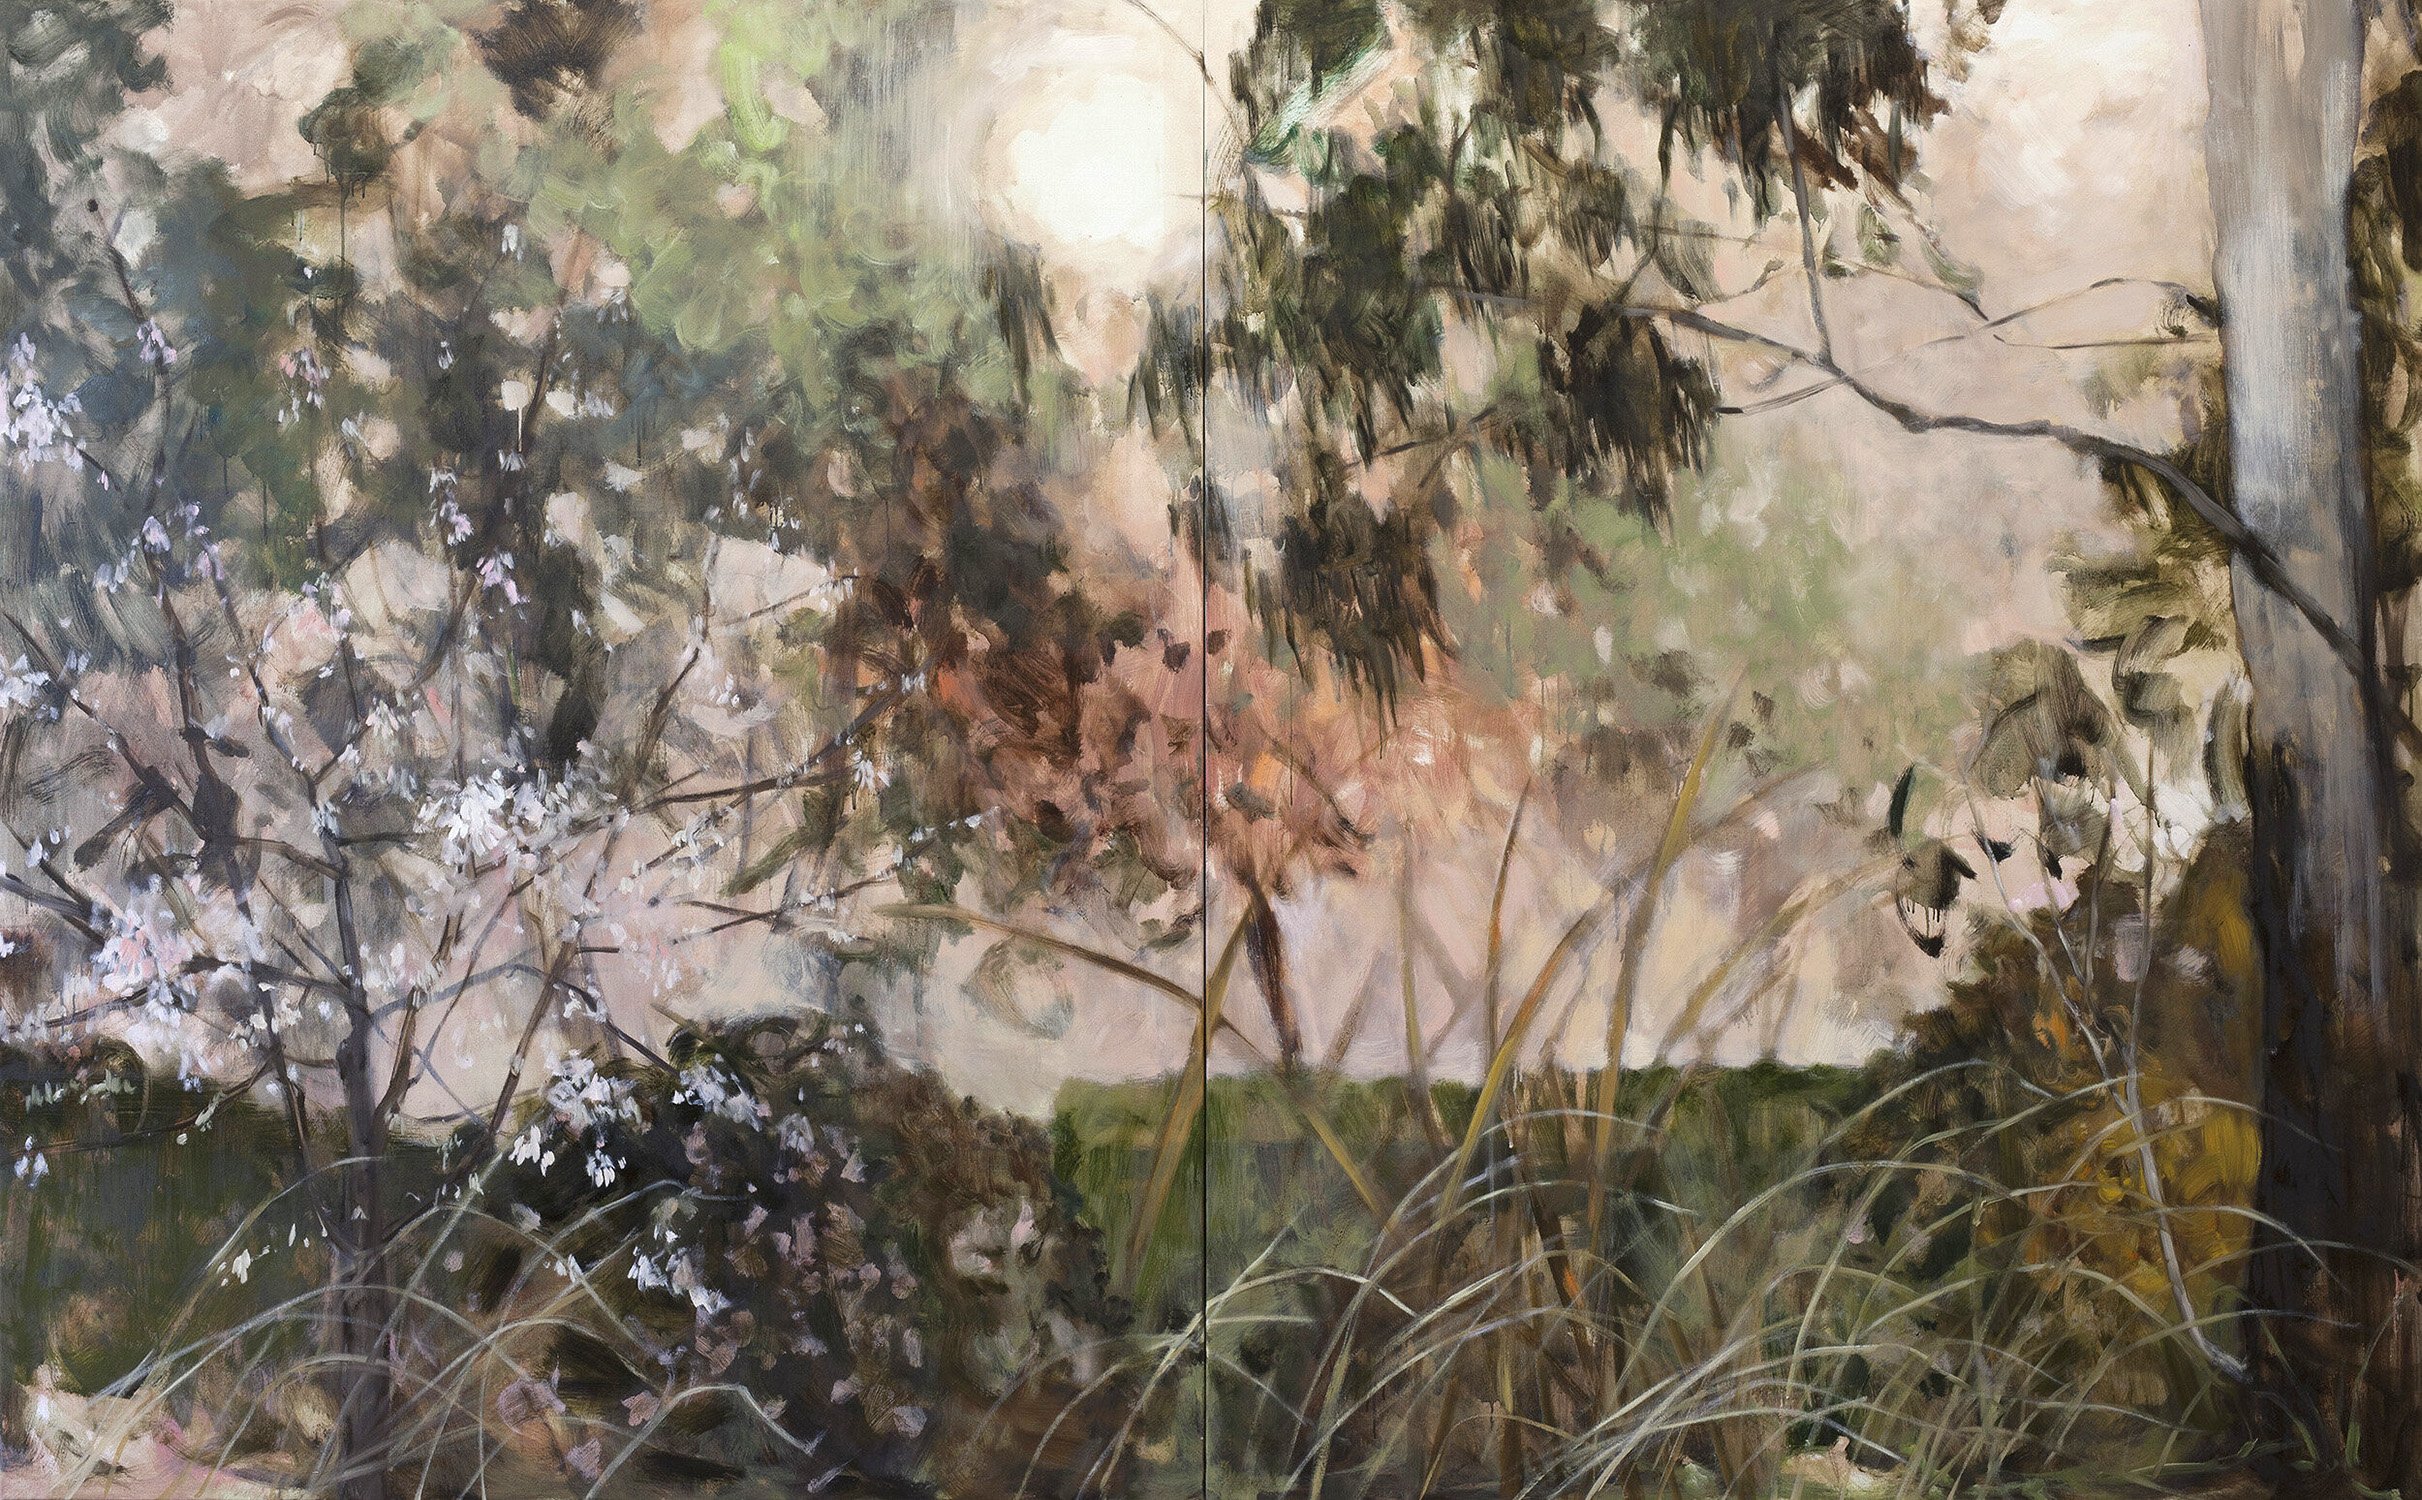   Boundary Hedge, Another Dry Spring,  2020  oil on linen, two panels, total 183 x 295cm 